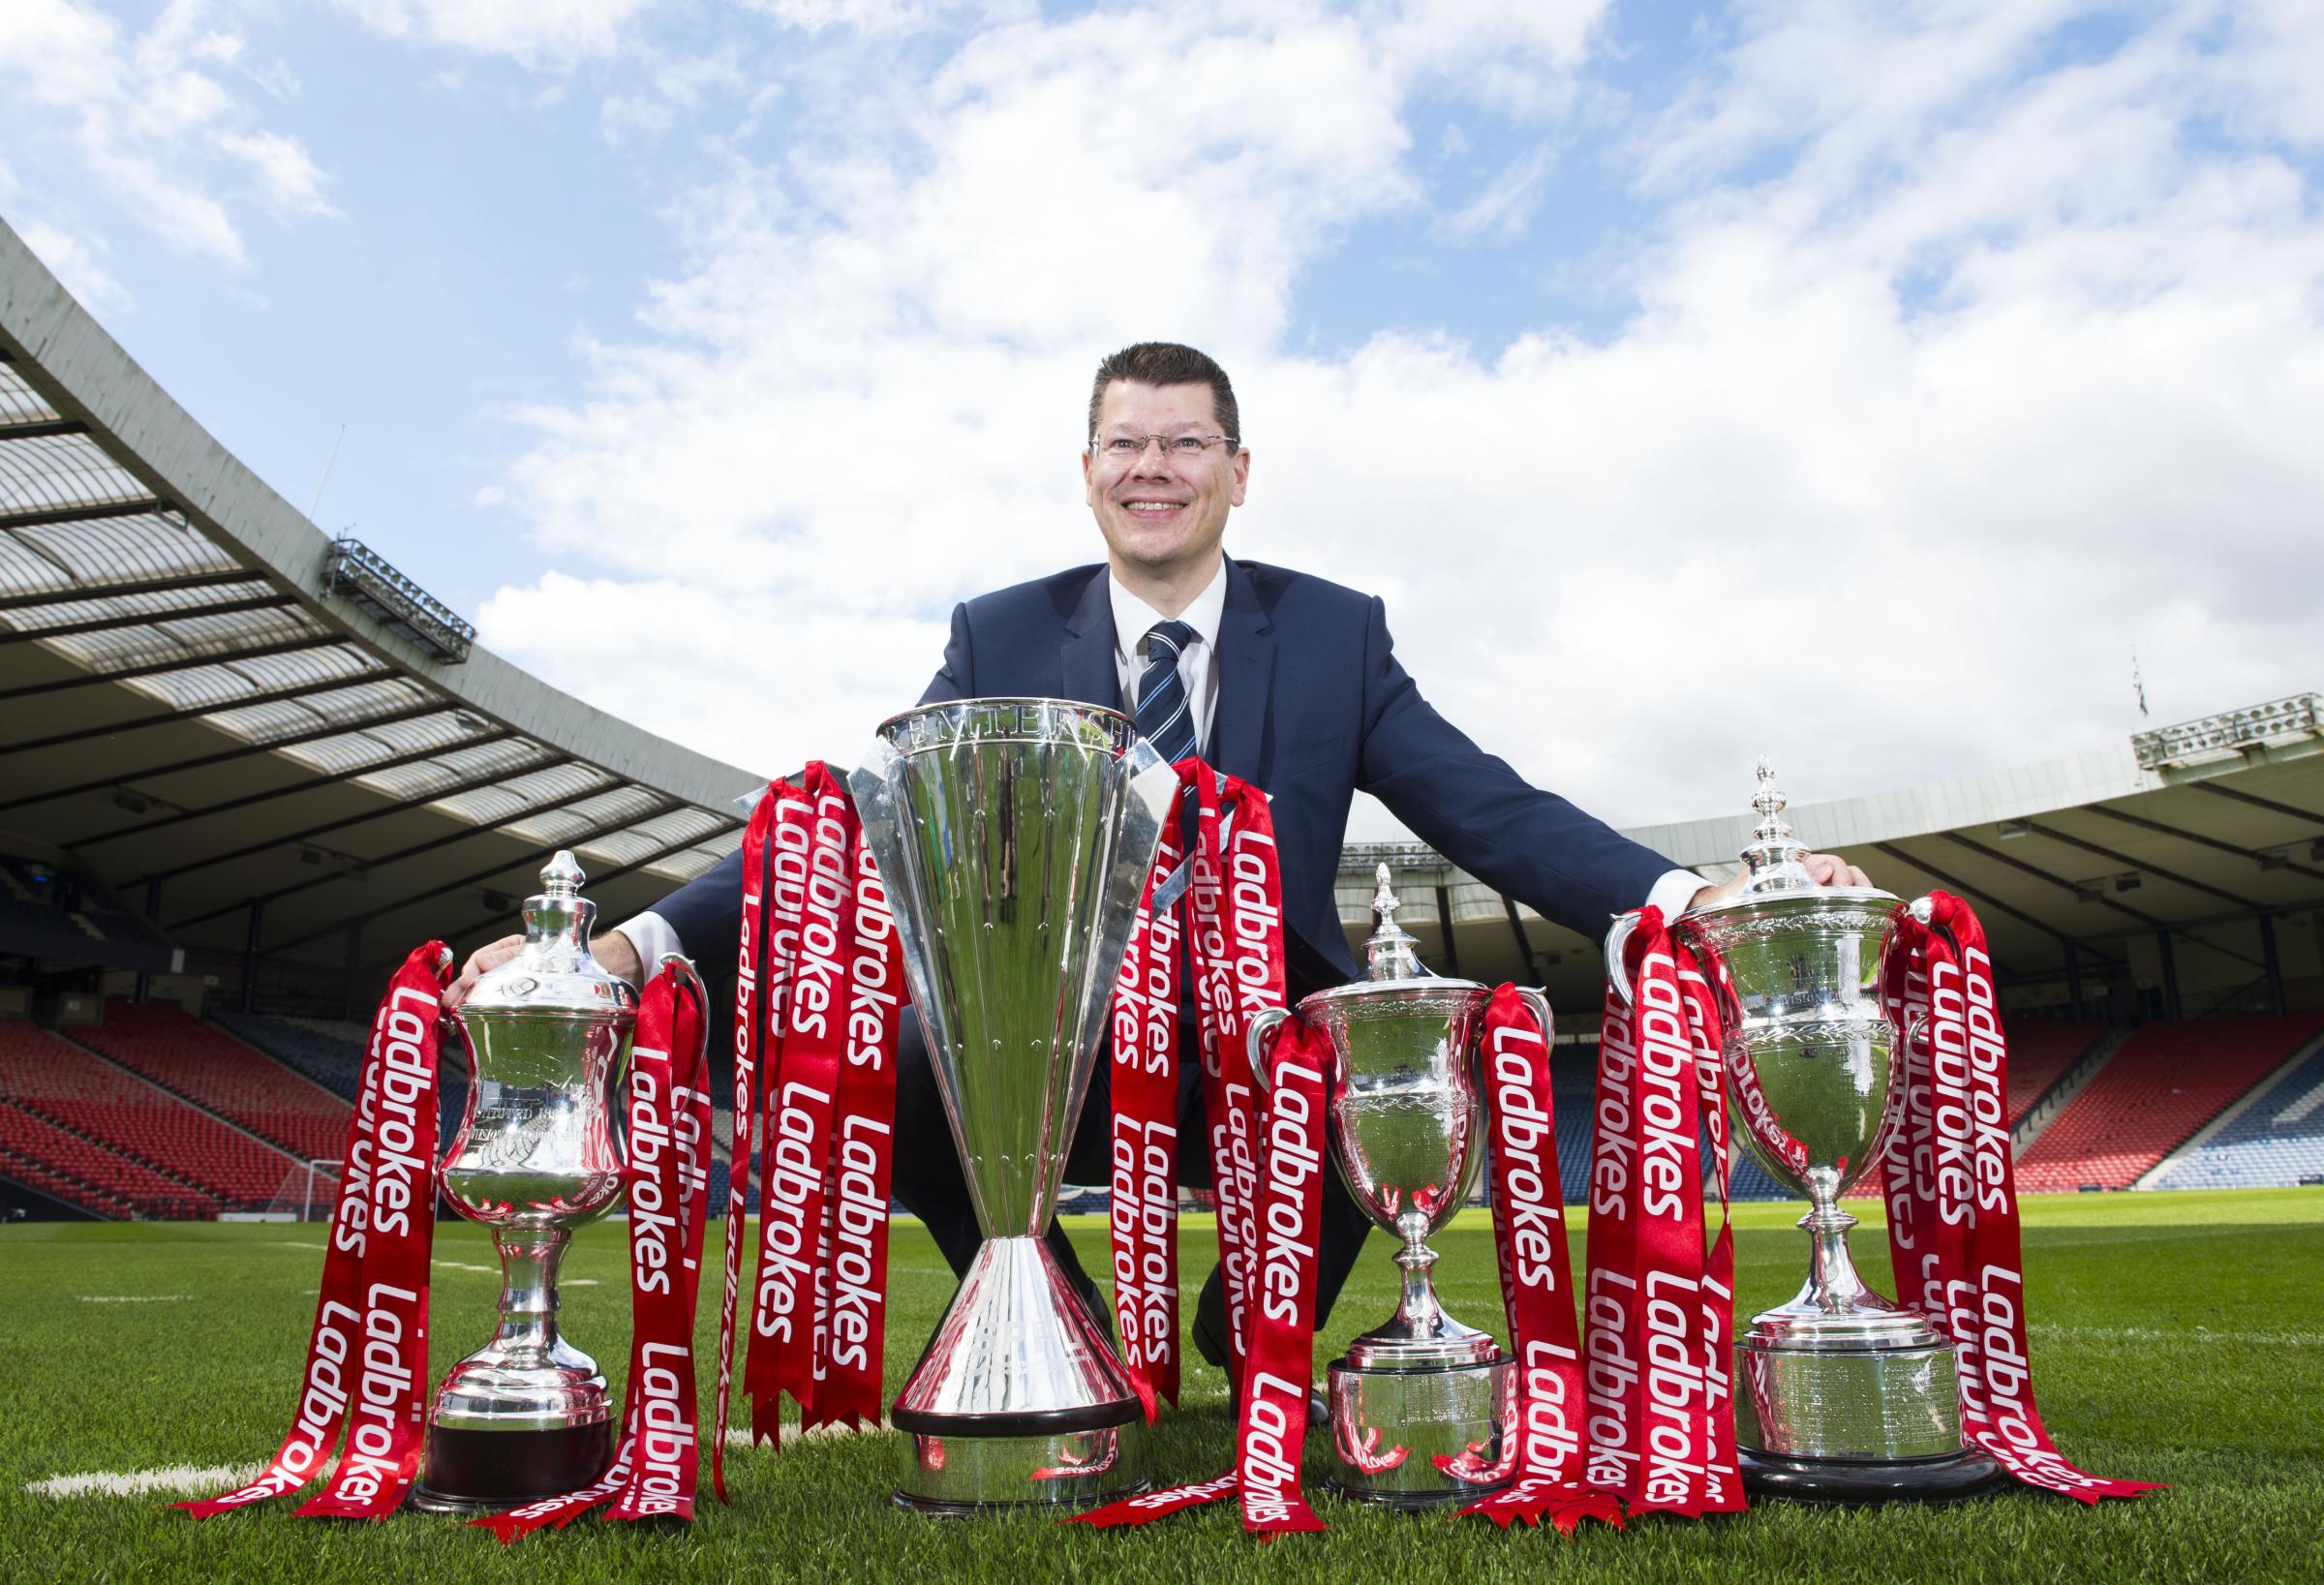 SPFL chief executive Neil Doncaster on legal threats, reconstruction, the Sky deal and healing wounds